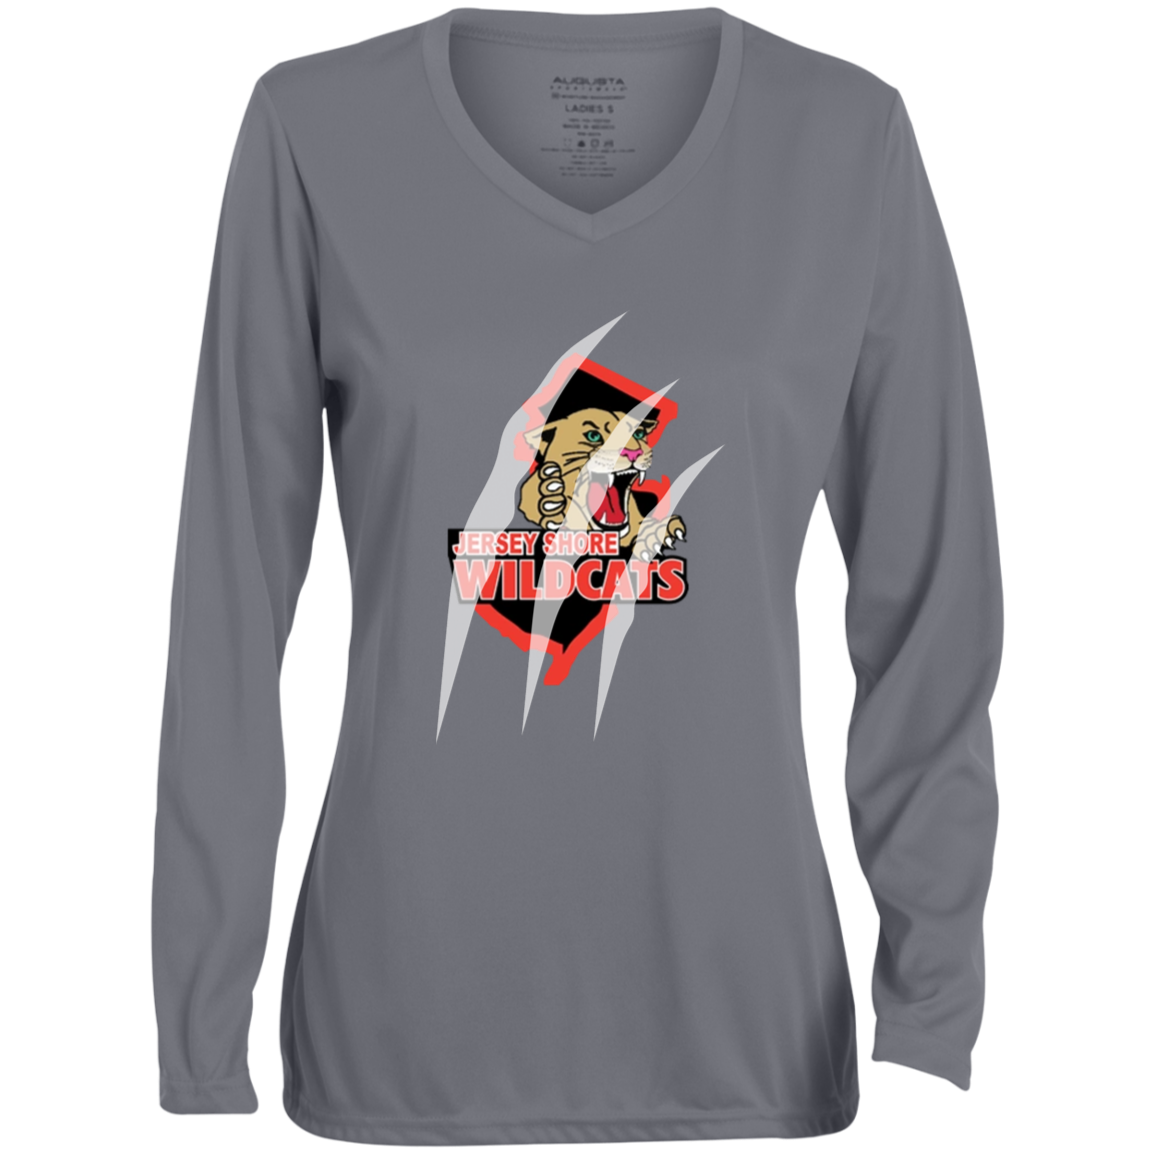 Claw Marks Wildcats Ladies' Moisture-Wicking Long Sleeve V-Neck Tee